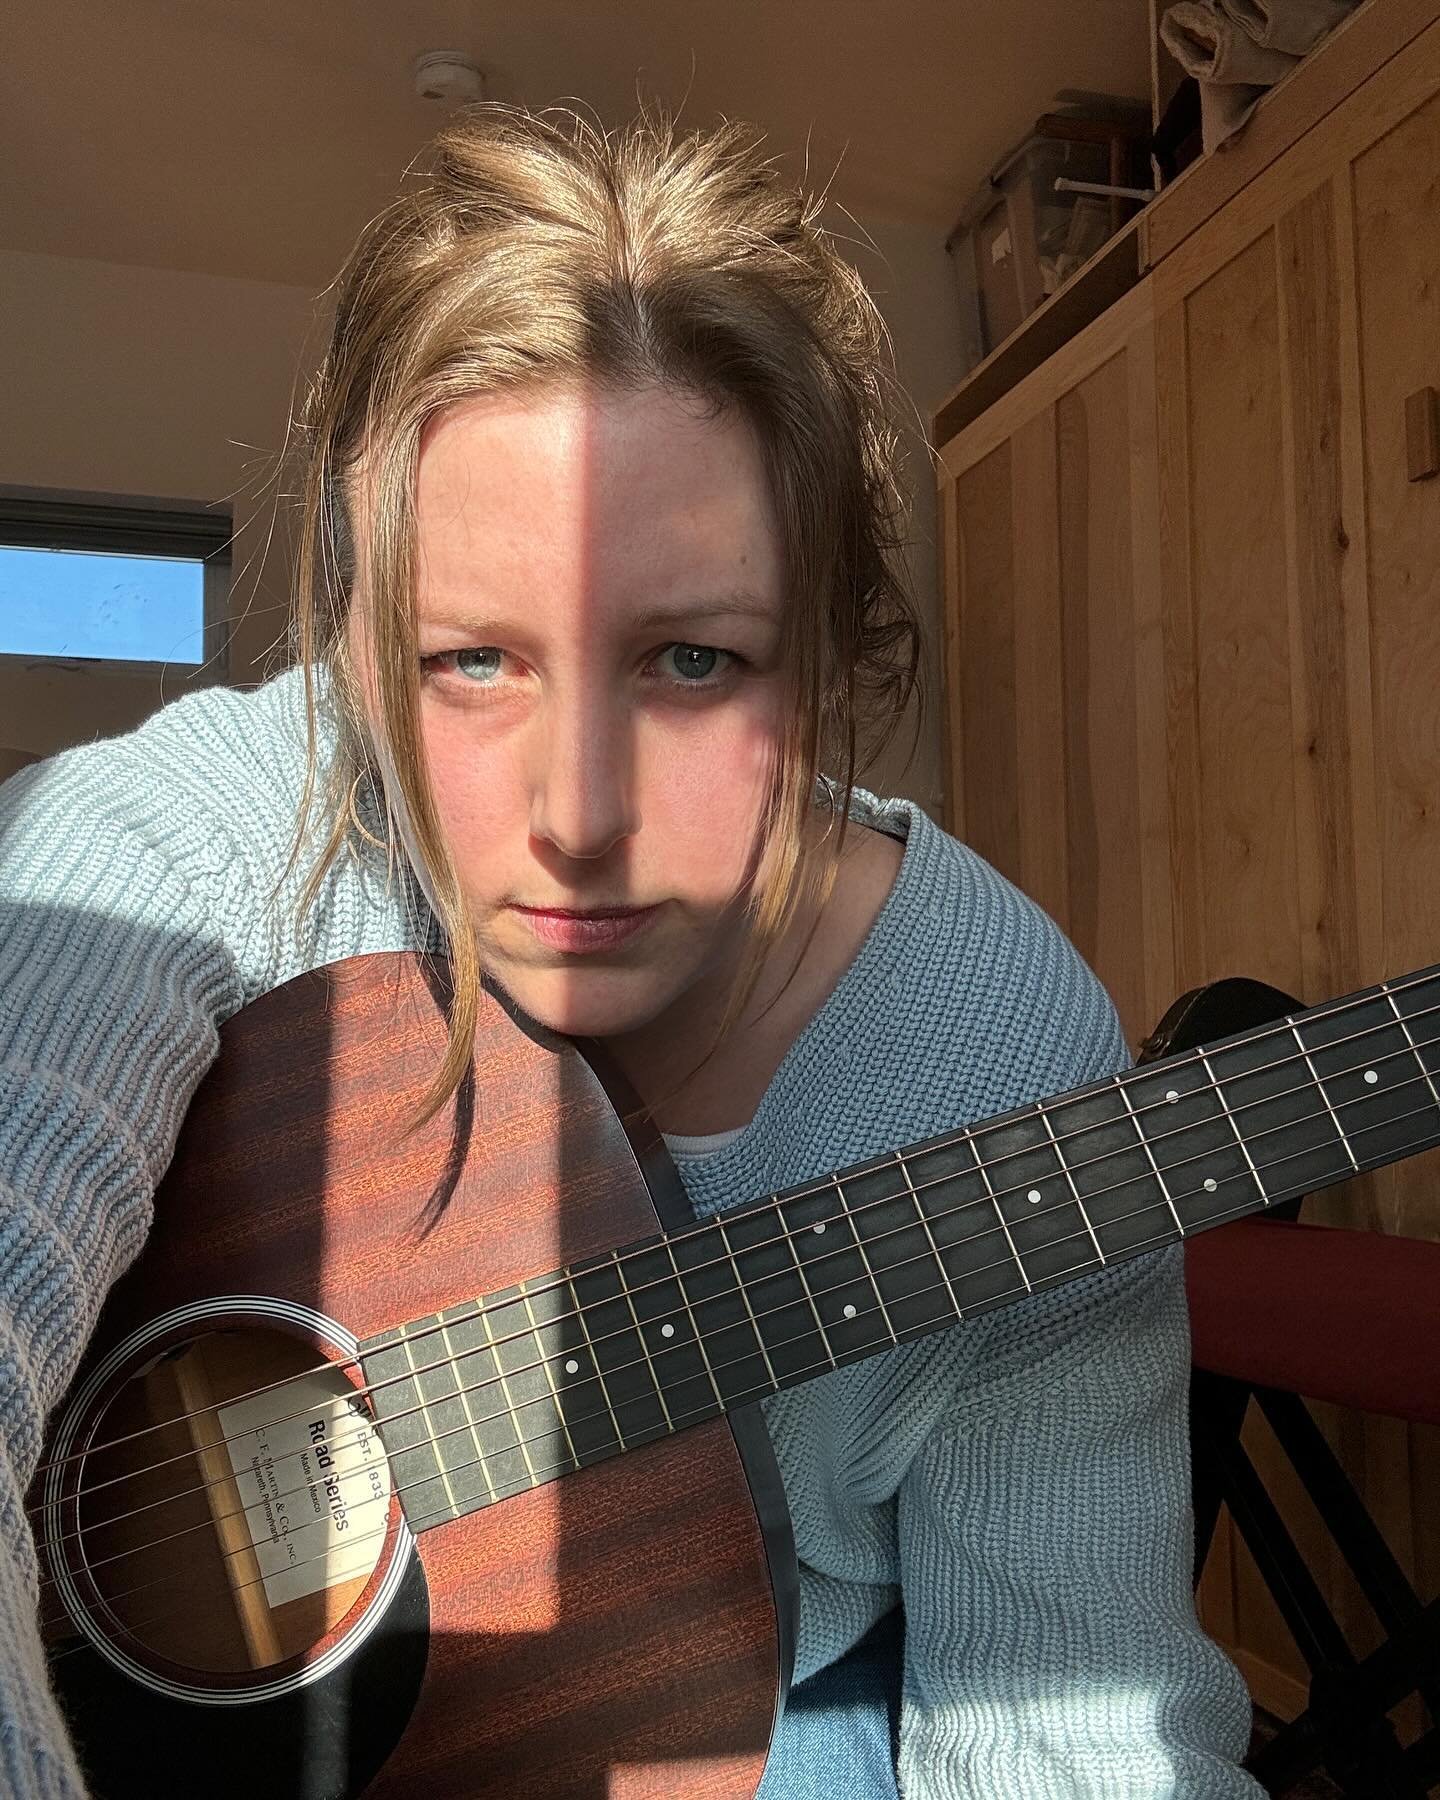 in the shadows and sunshine, getting tunes together for a solo set Sunday 2pm at @standing_stone_wines_vt for @wakingwindows 🩵 

been adding The Middle by @jimmyeatworld to my solo setlist, because that song pops into my head a lot. It was all over 